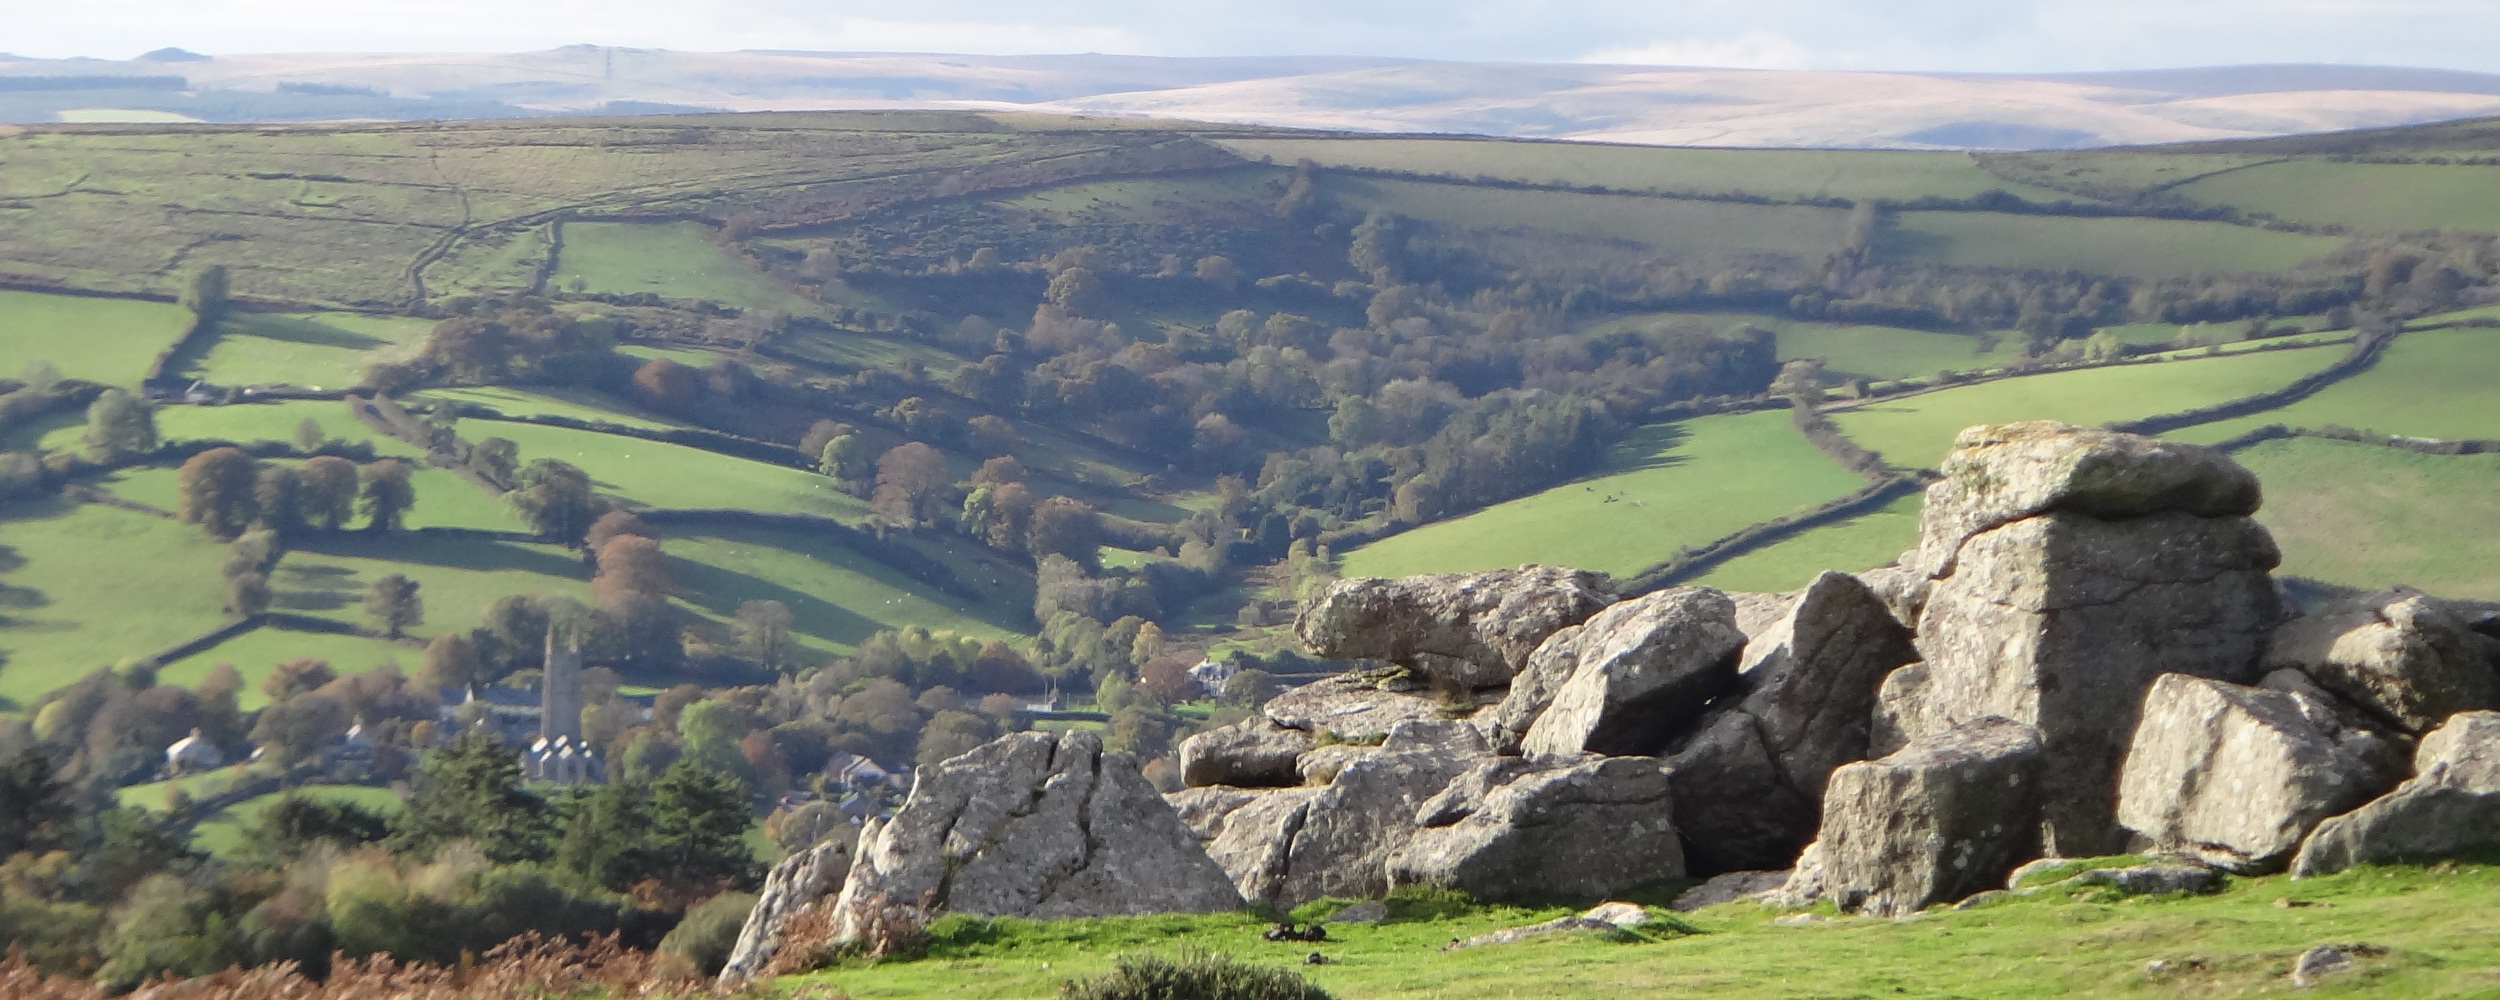 Looking North Up Widecombe Valley